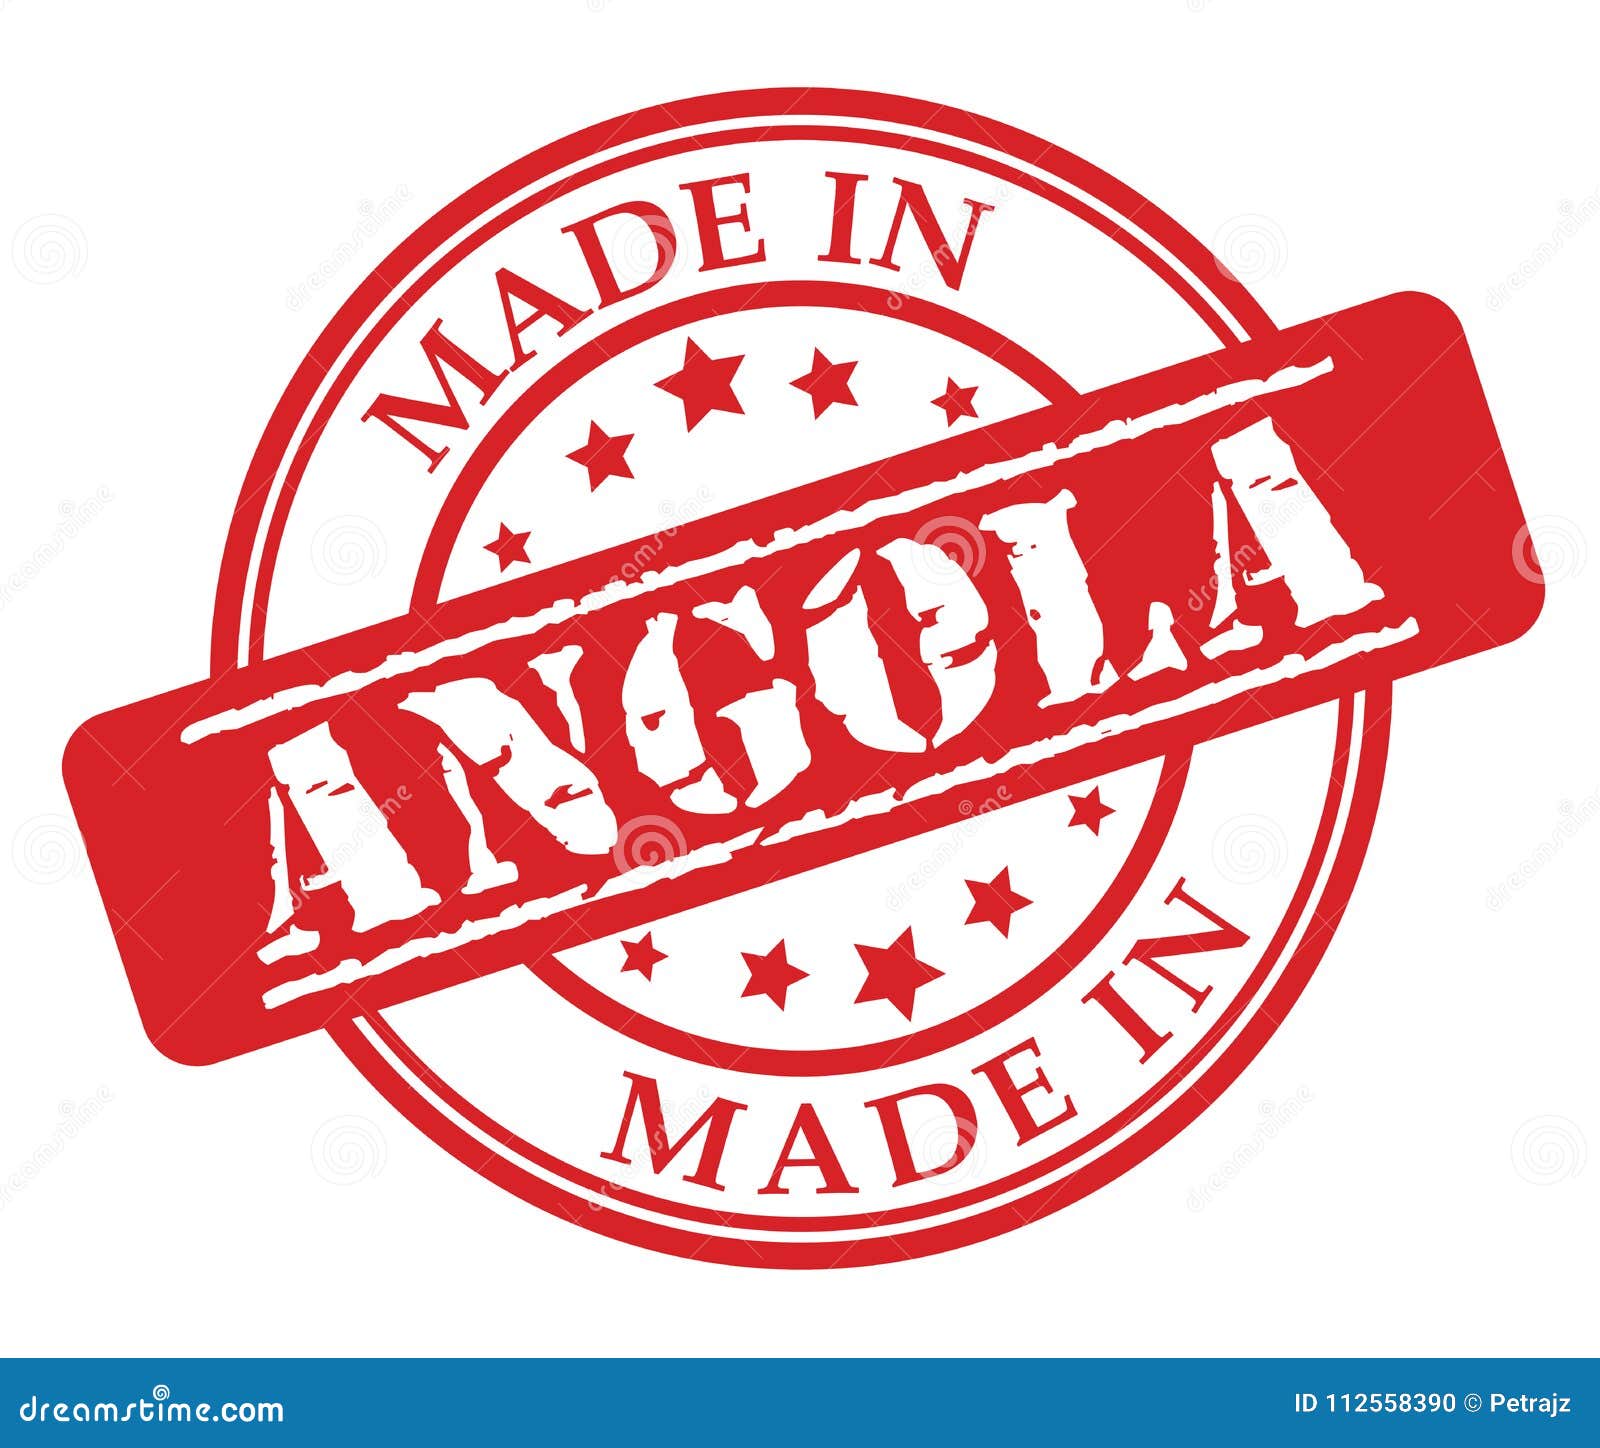 Made in Angola Red Rubber Stamp Stock Vector - Illustration of seal ...